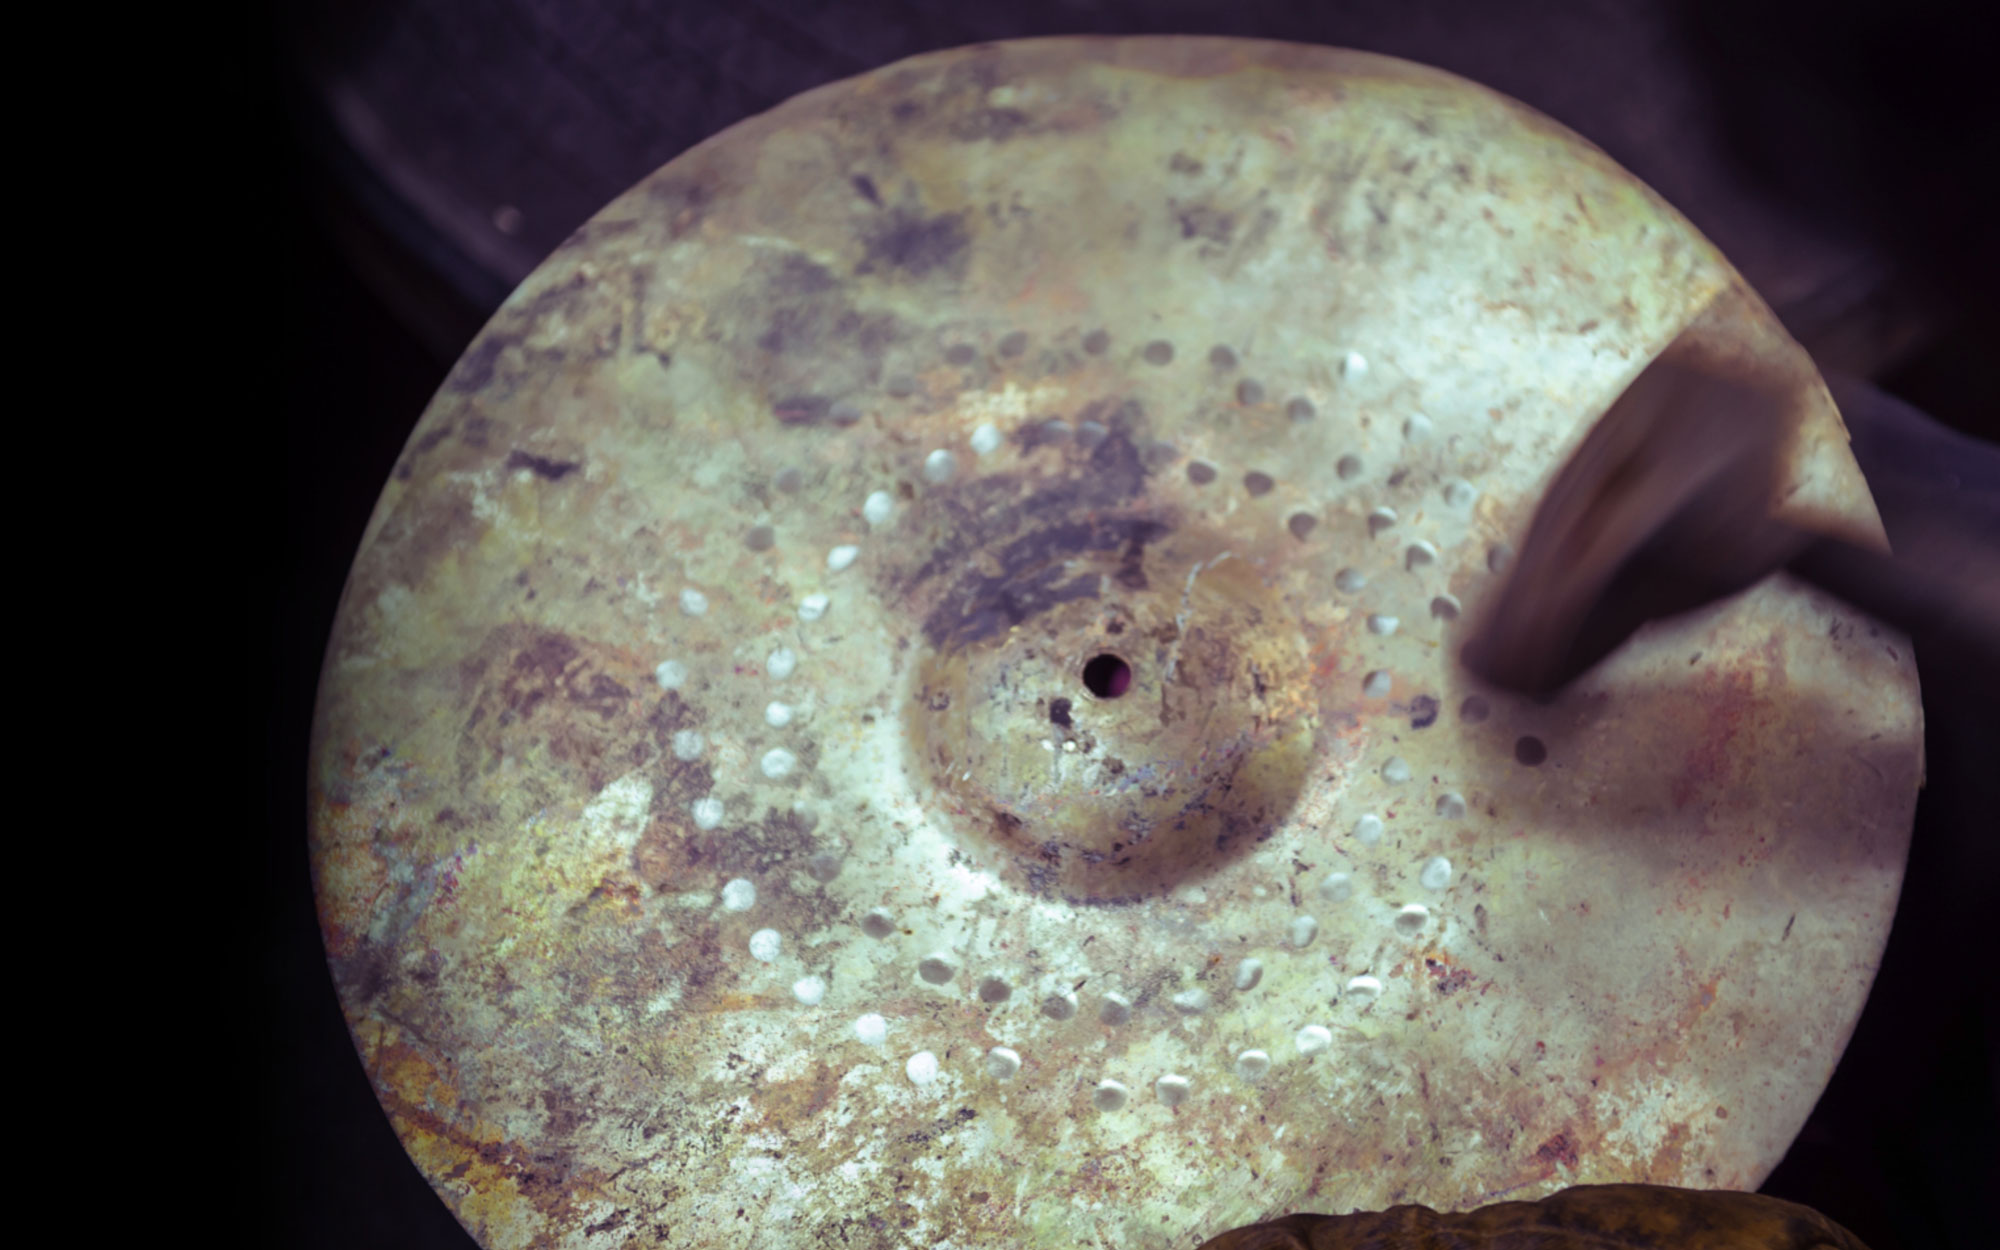 Hammering the cymbal